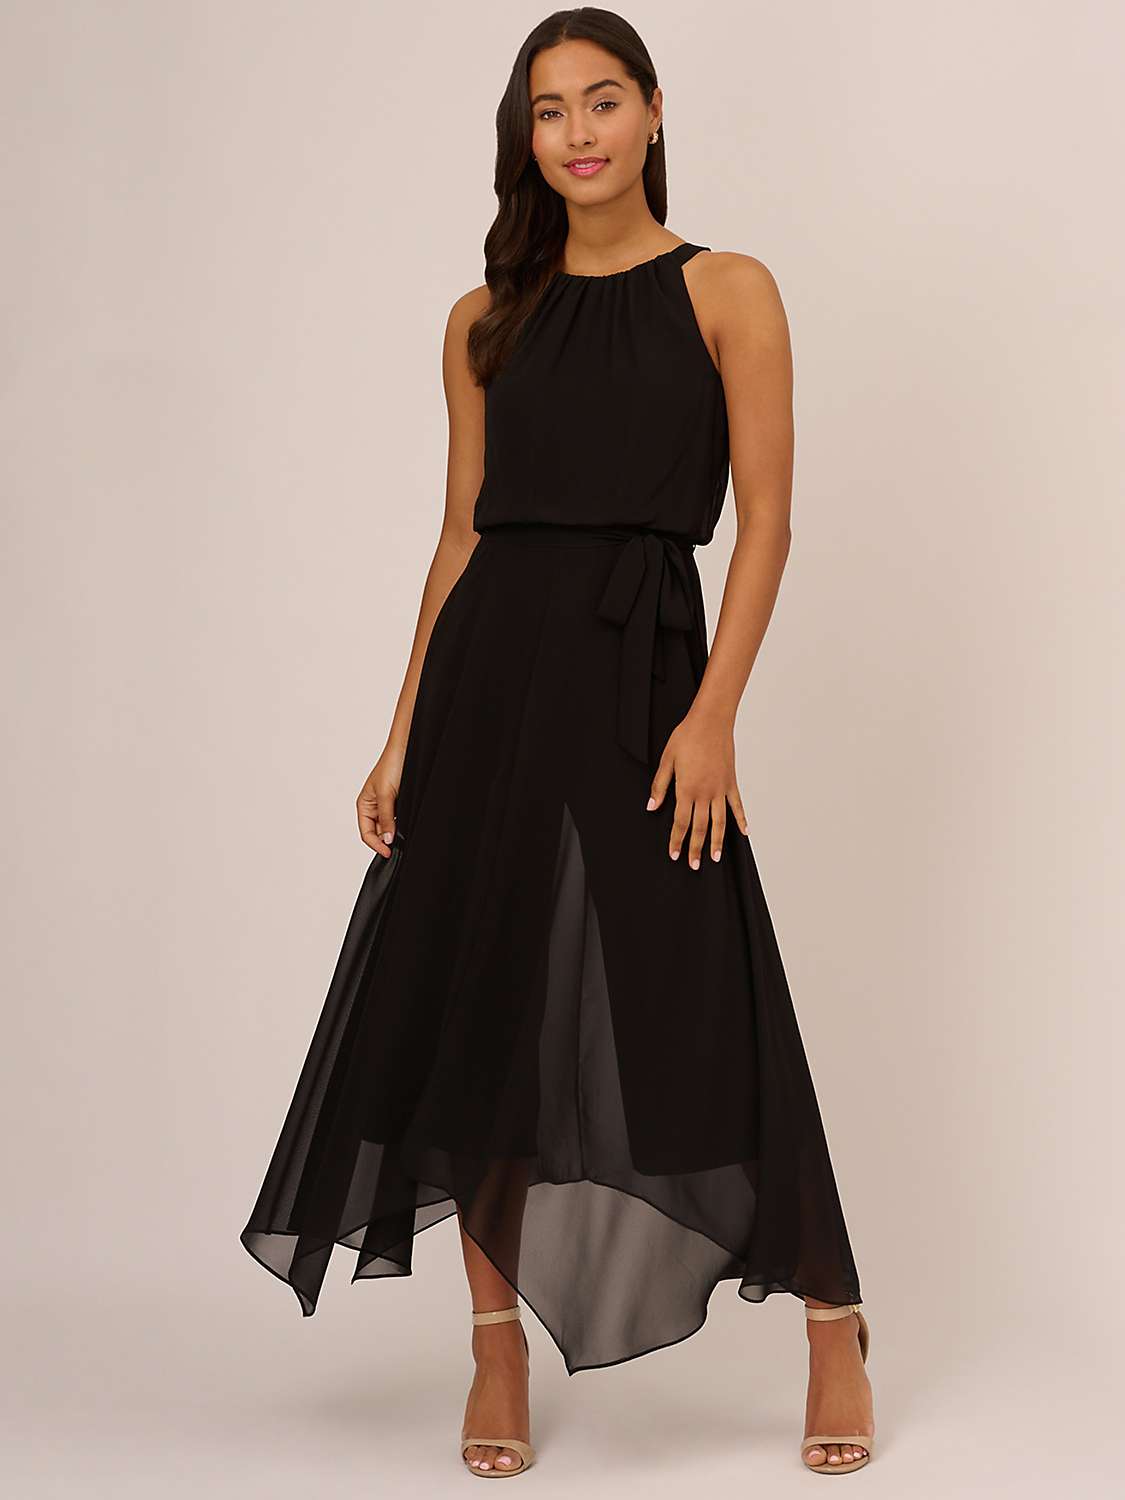 Buy Adrianna Papell Jersey And Chiffon Jumpsuit, Black Online at johnlewis.com